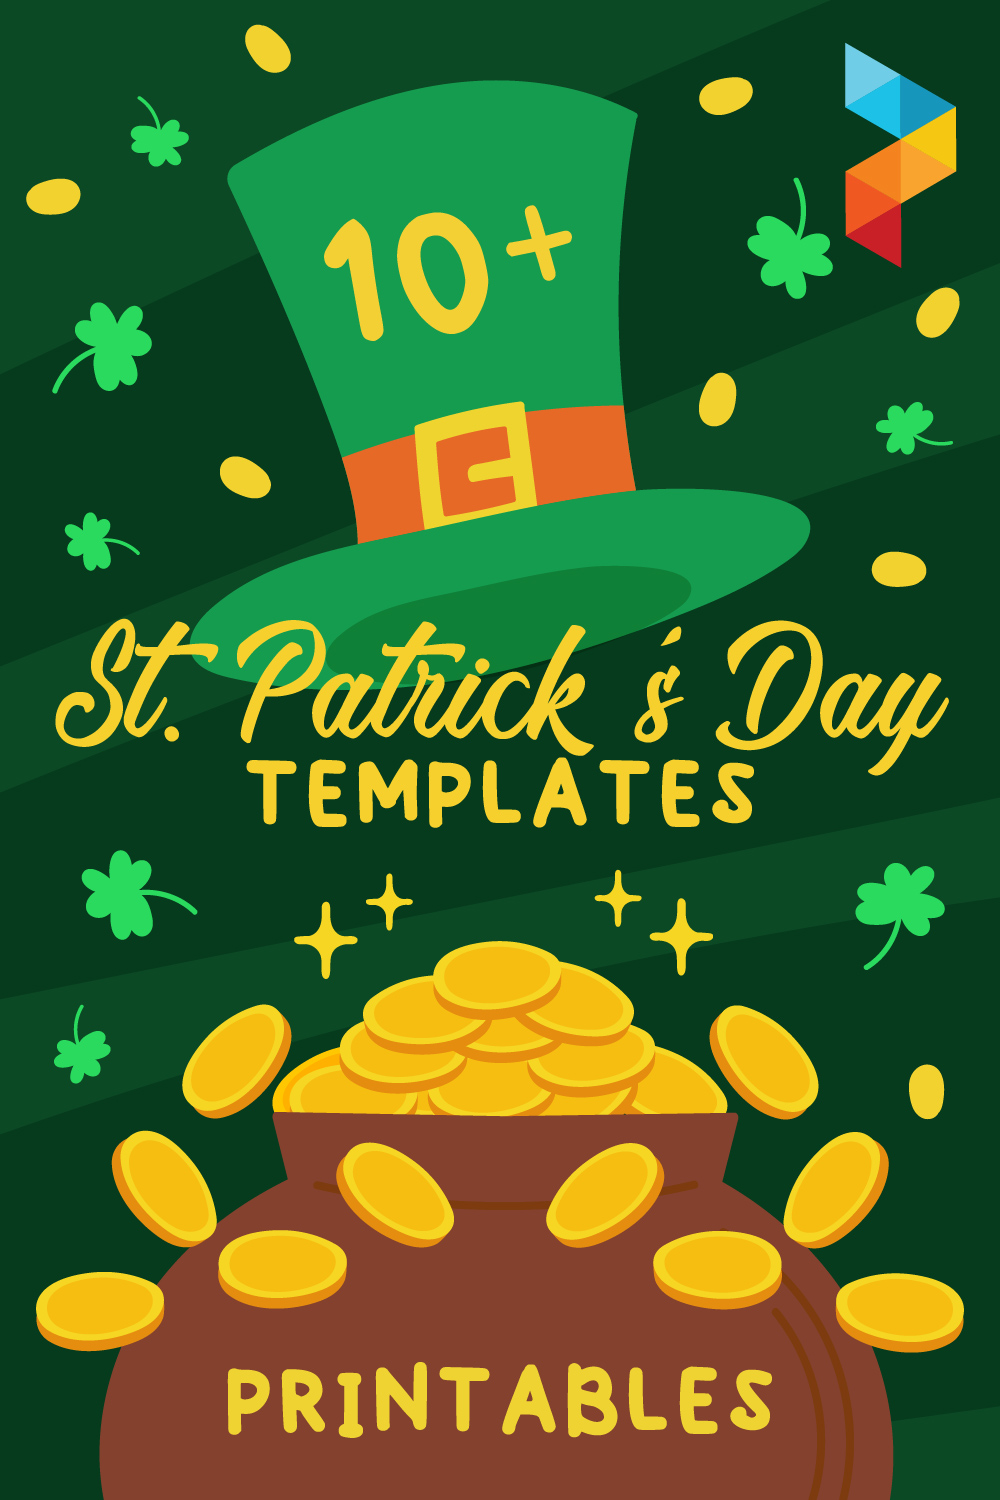 St Patrick's Day Templates s